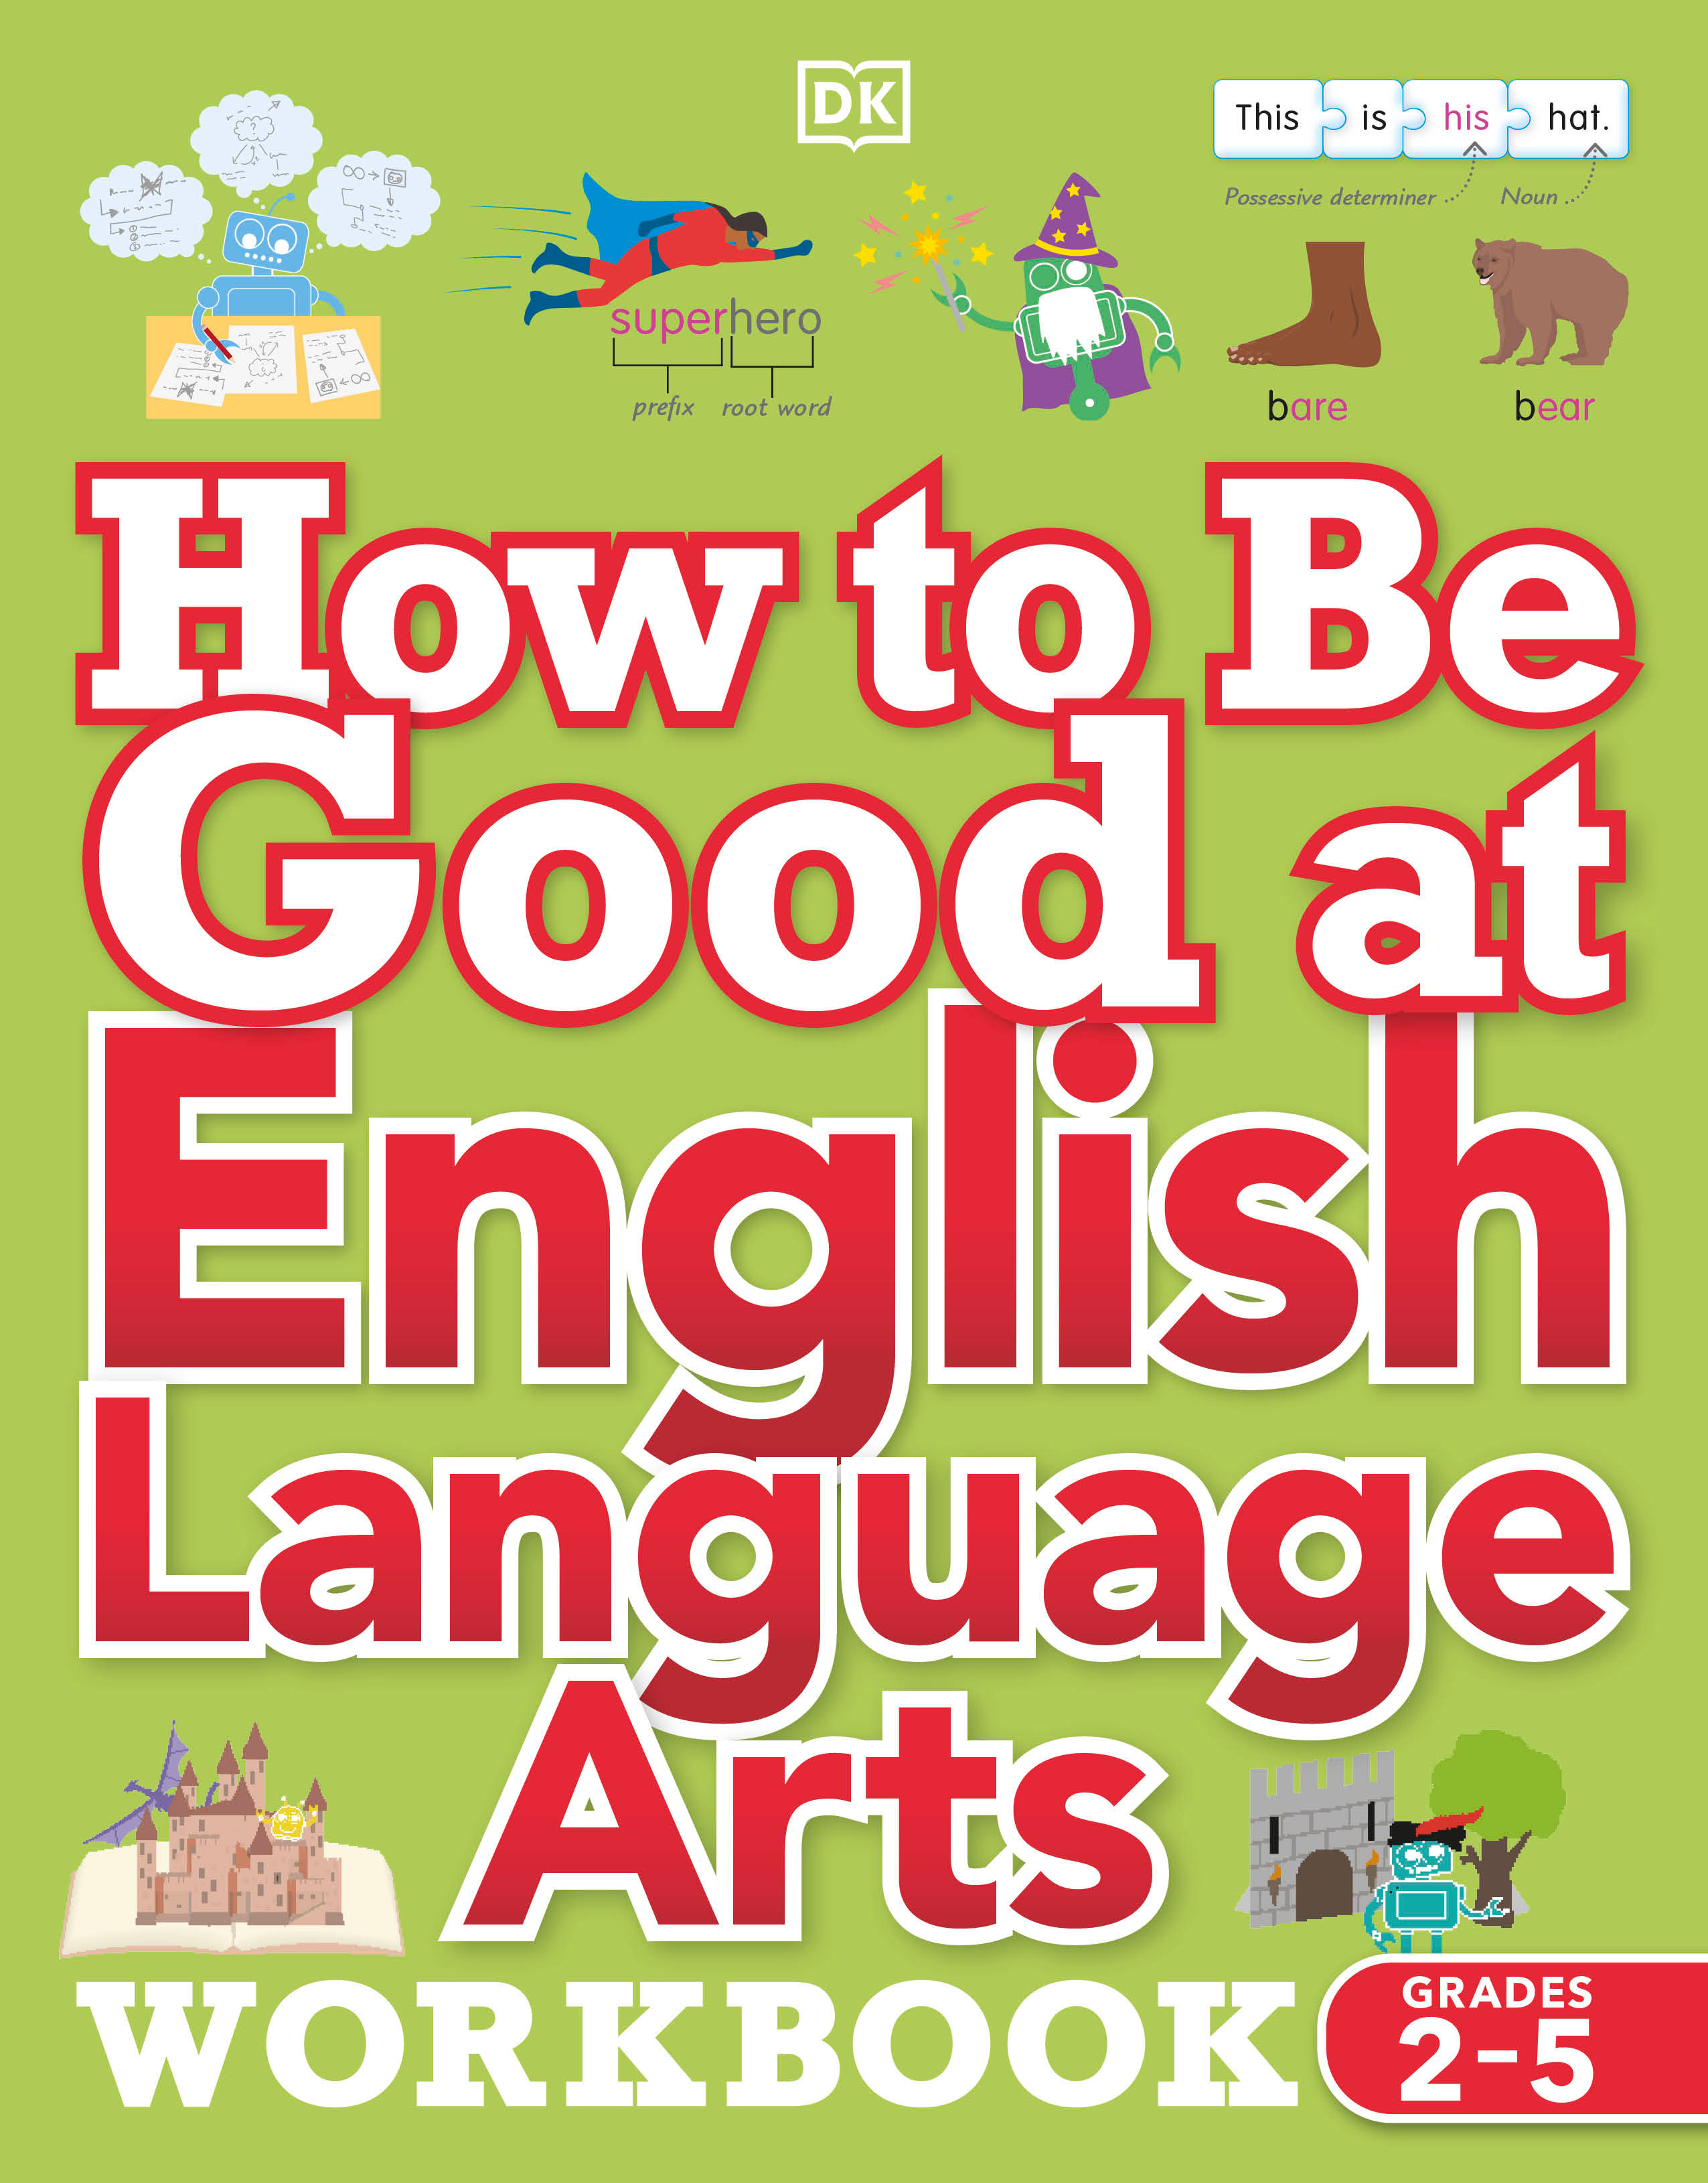 How to Be Good at English Language Arts Workbook, Grades 2-5 : The Simplest-Ever Visual Workbook | 